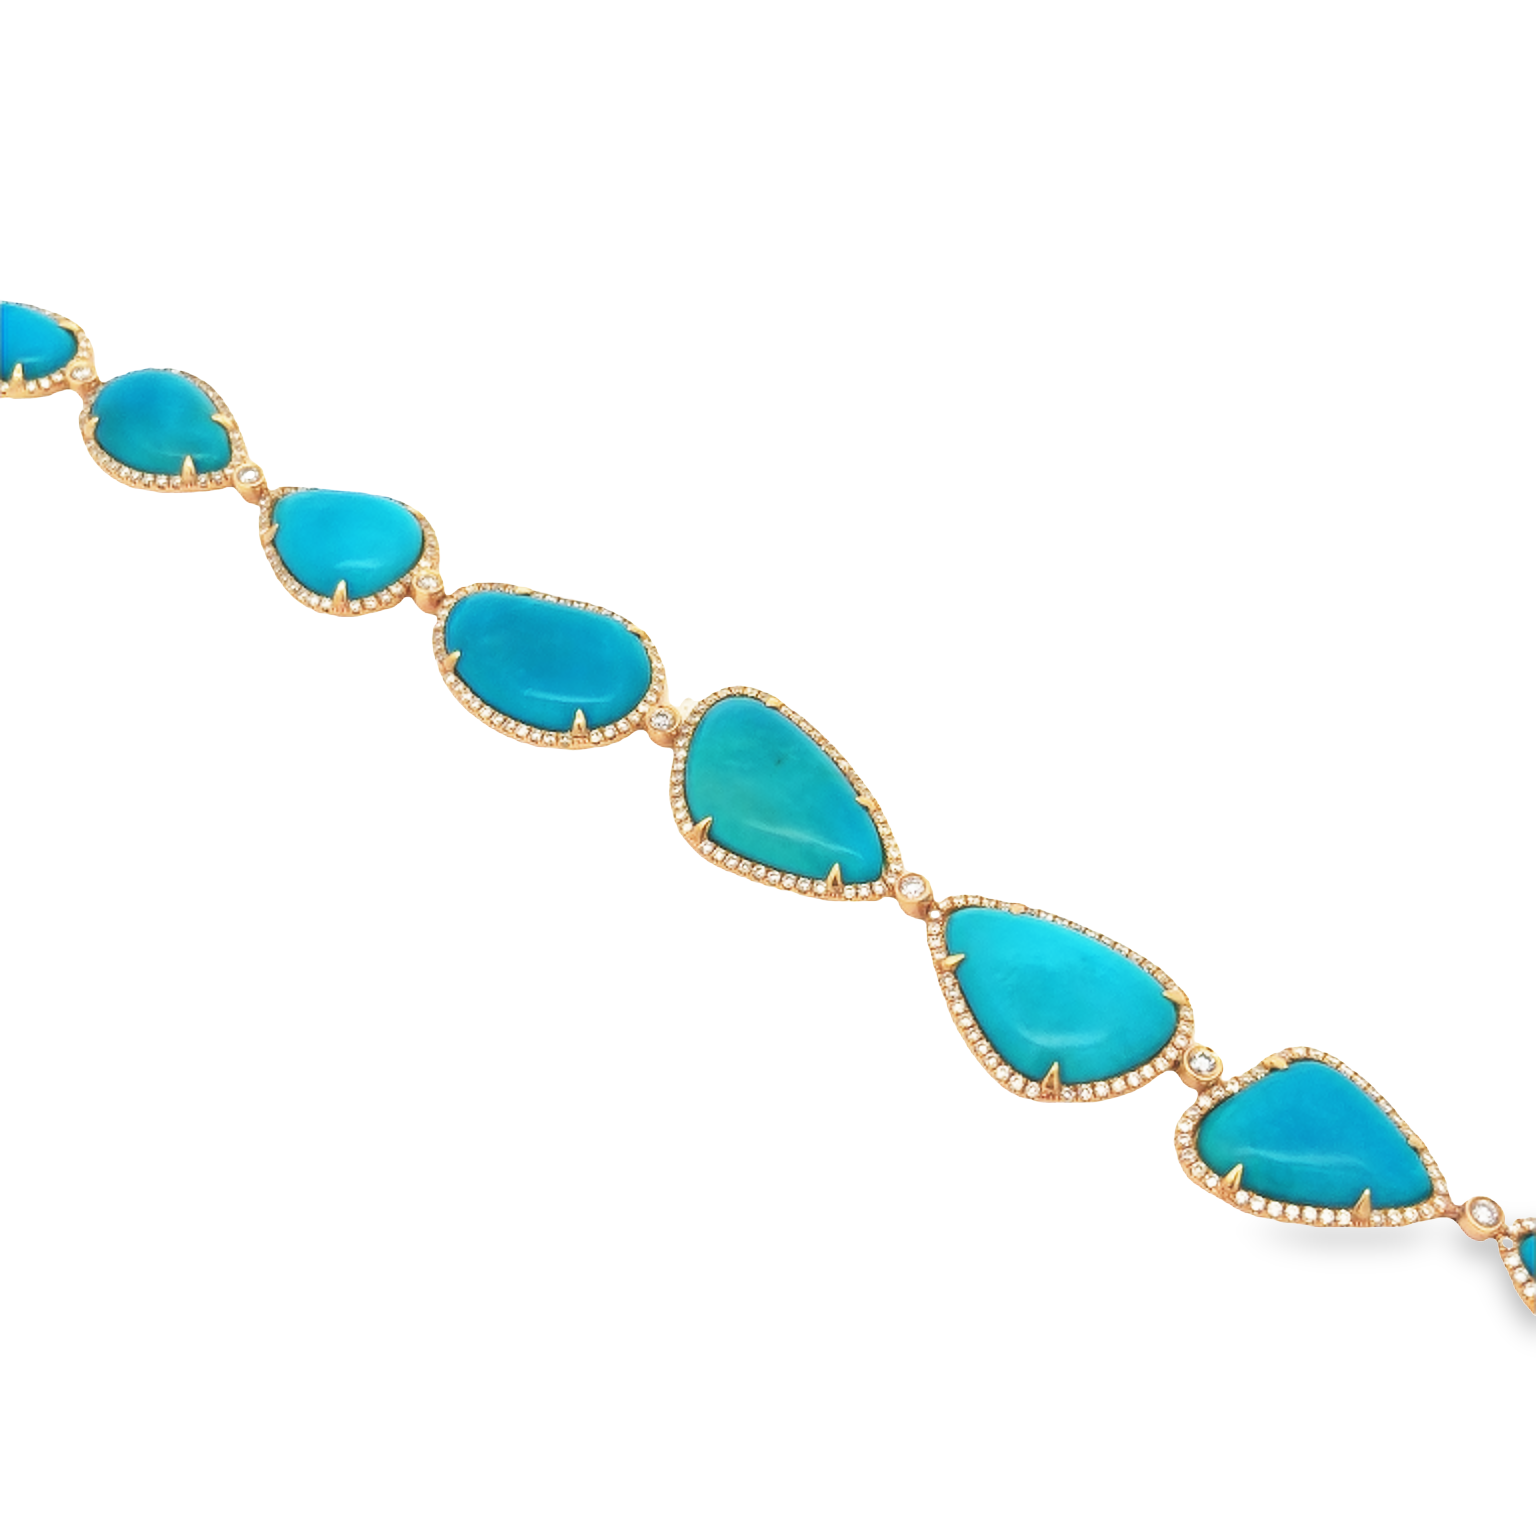 18K Rose Gold Turquoise and Diamond Bracelet with 9 Turquoise sections